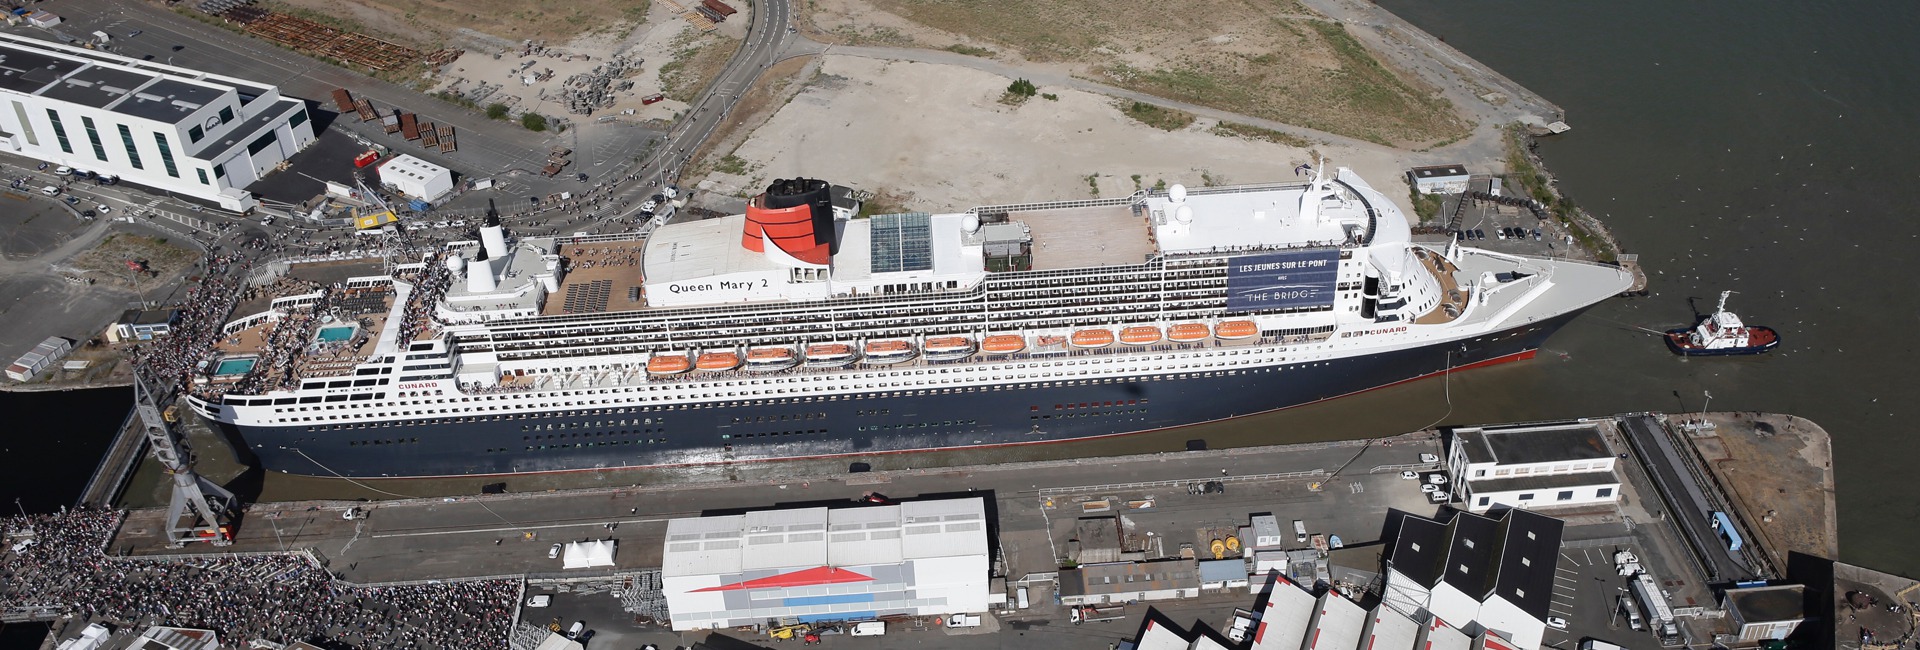 Le Queen Mary 2 